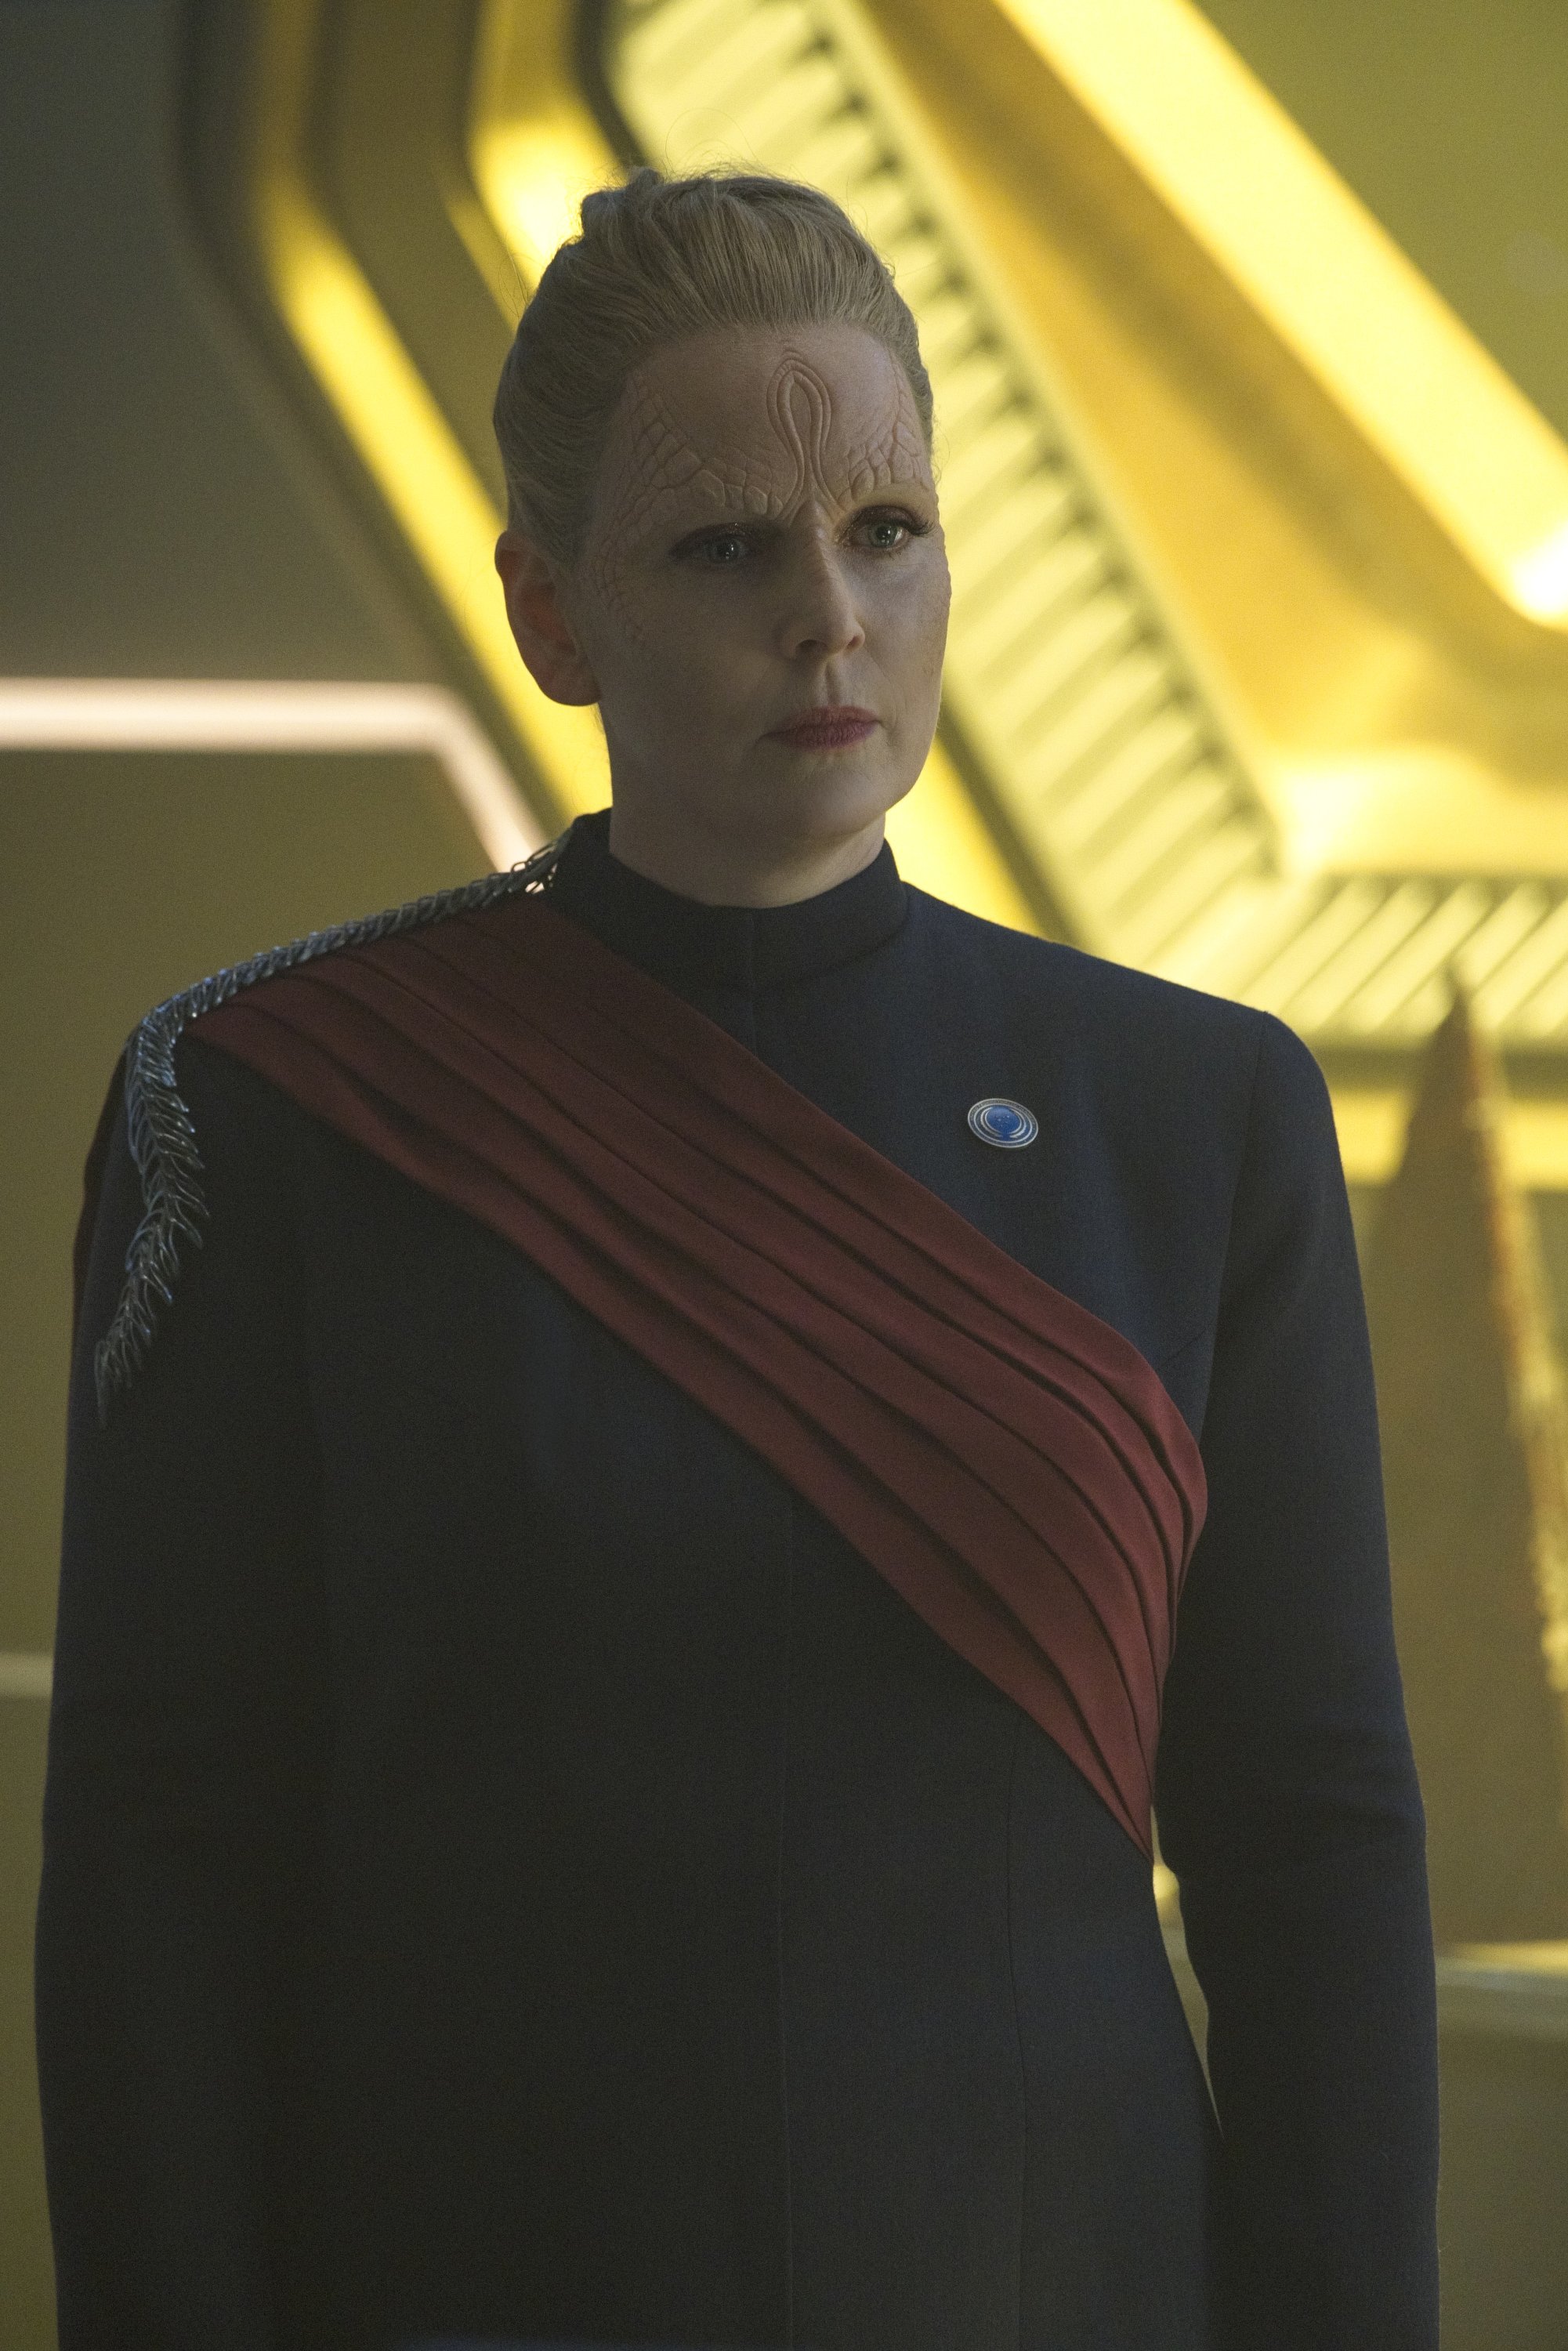   Pictured: Chelah Horsdal as President Laira Rillak of the Paramount+ original series STAR TREK: DISCOVERY. Photo Cr: Michael Gibson/Paramount+ © 2021 CBS Interactive. All Rights Reserved.  